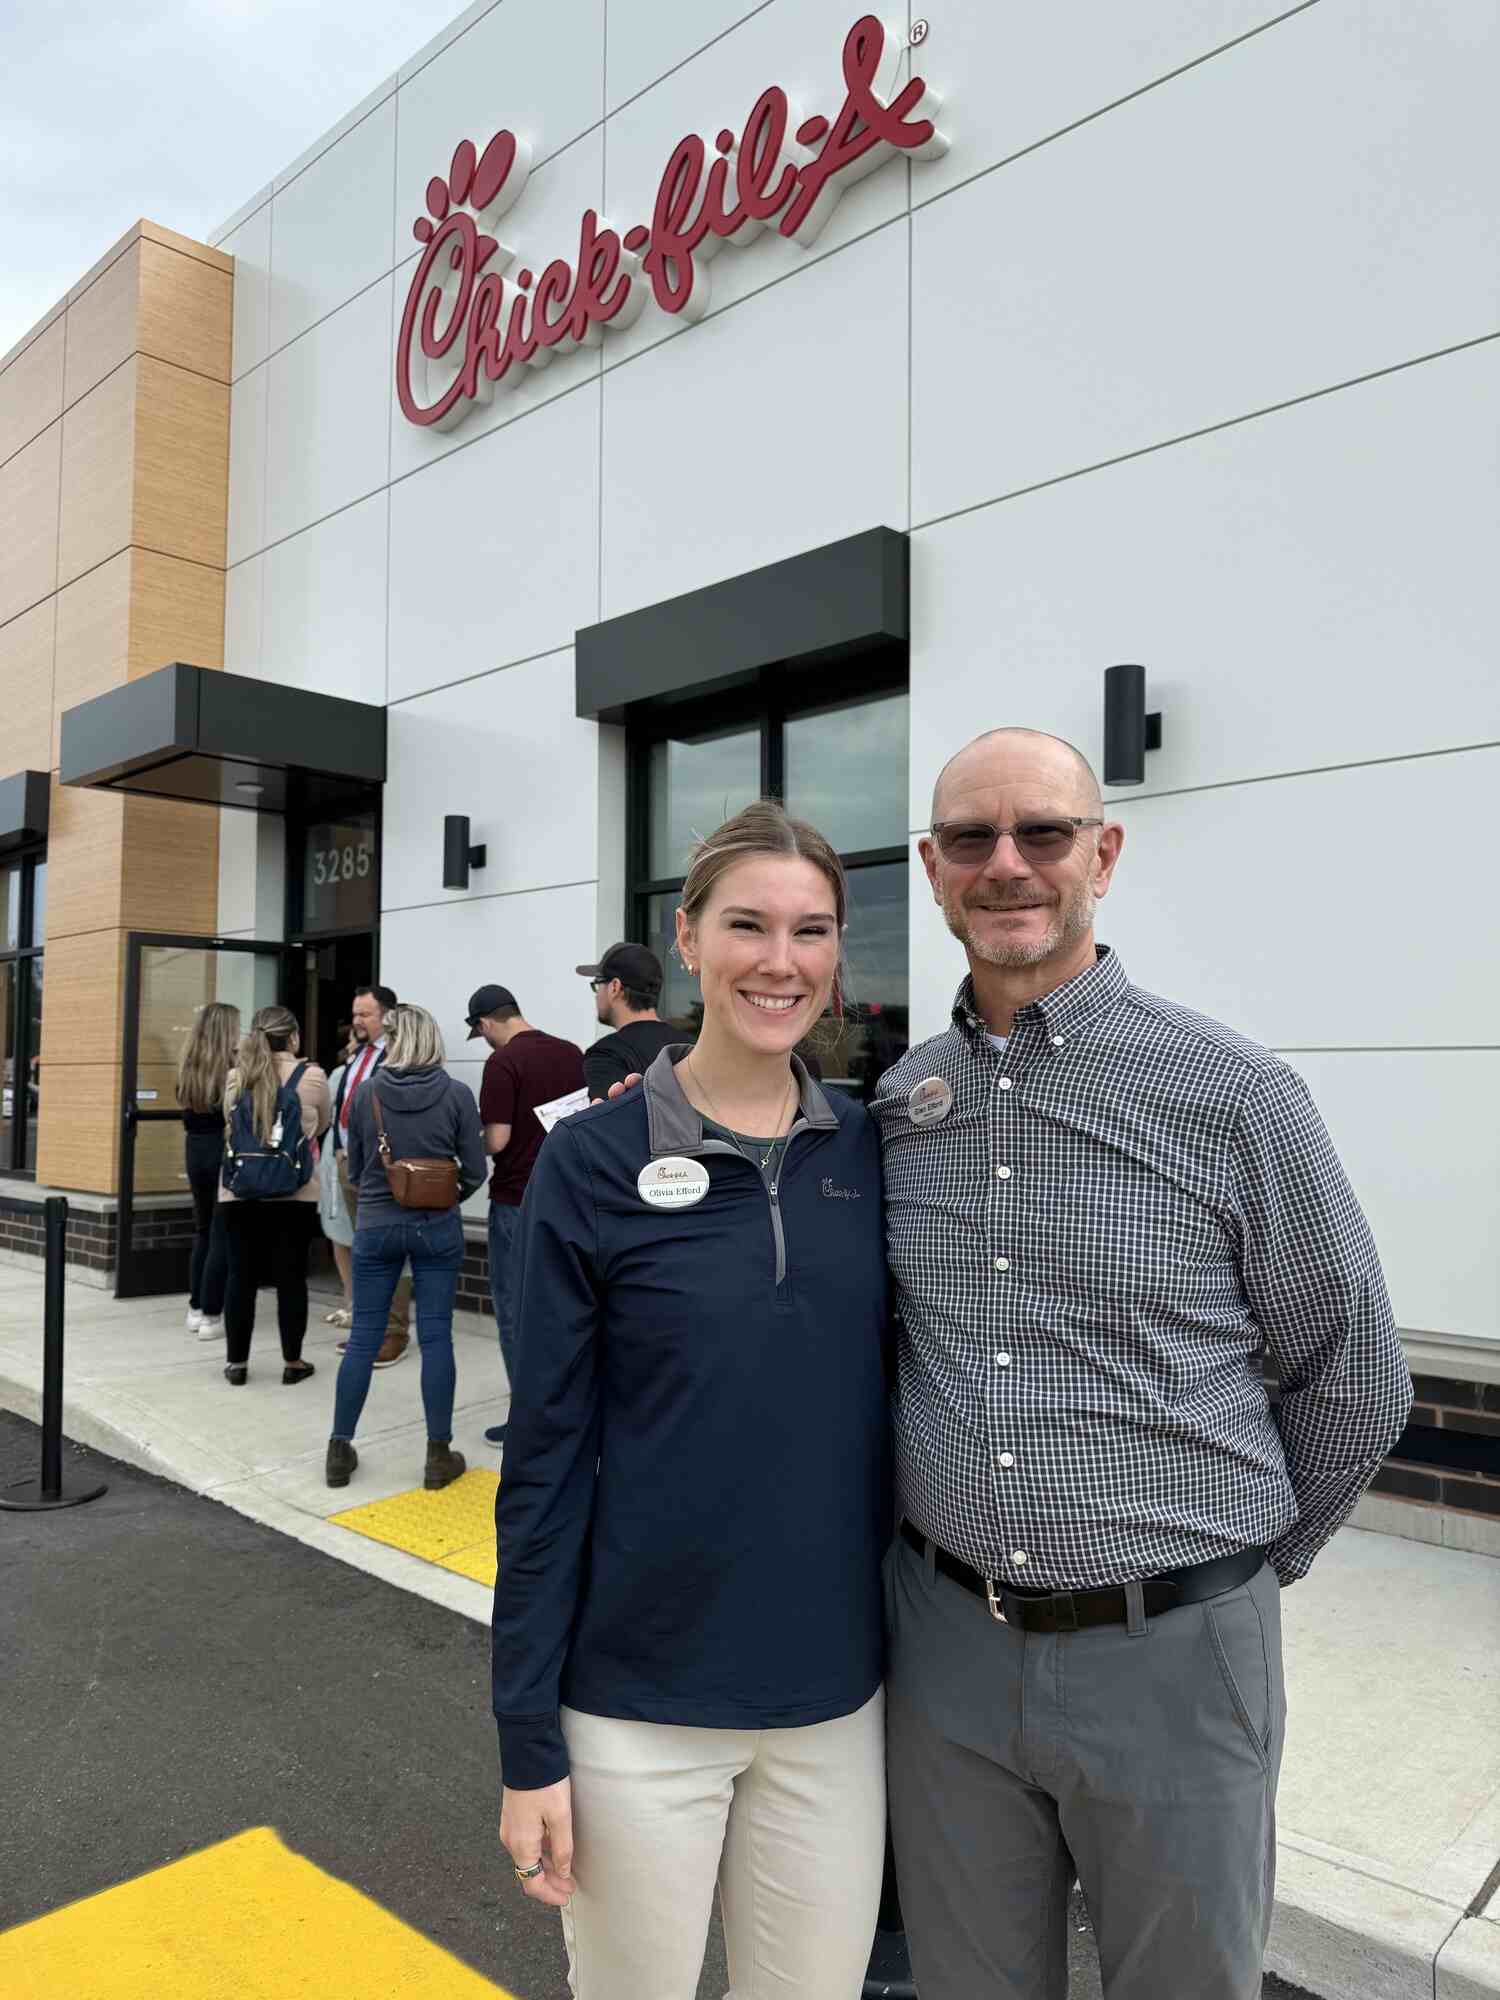 Owner-Operators Glen and Olivia Efford posing for a photo in front of her Chick-fil-A in Kitchener, Ontario, Canada.